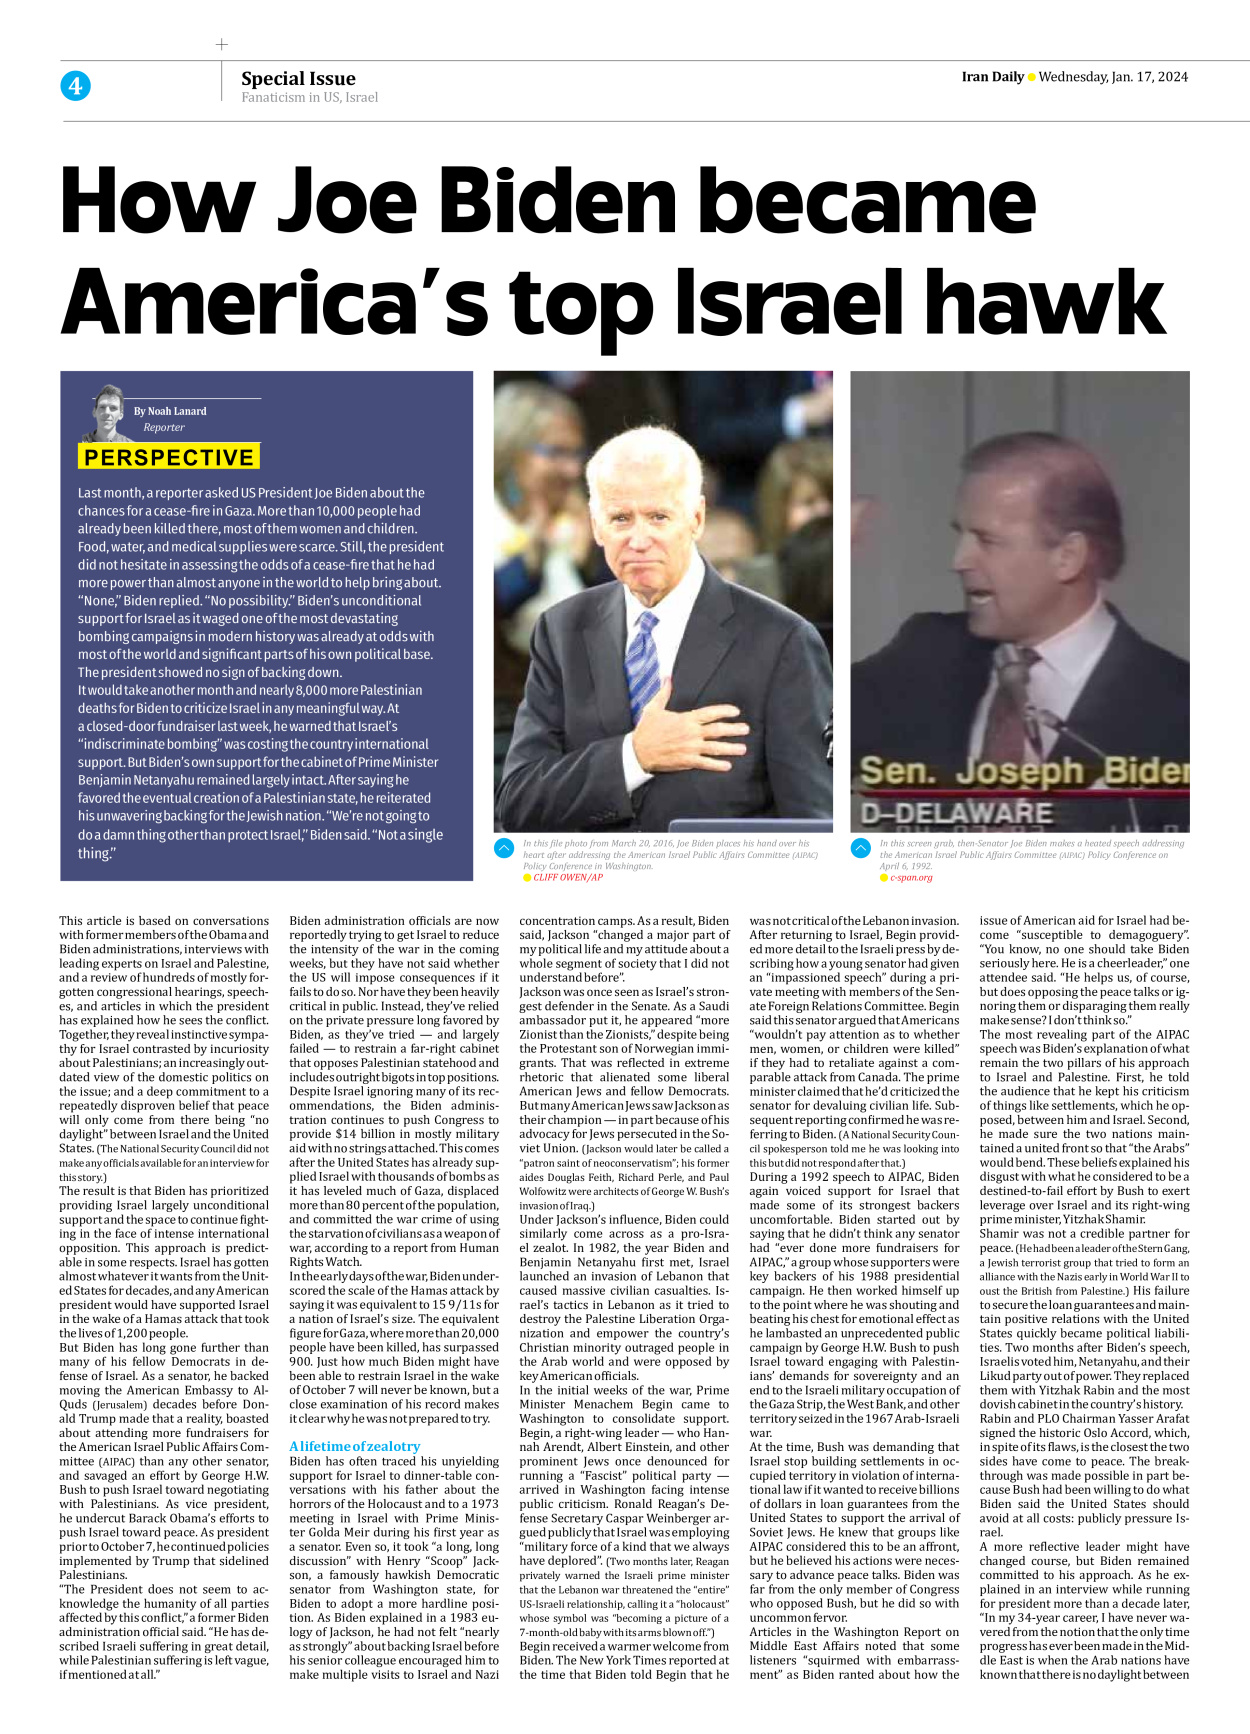 Iran Daily - Number Seven Thousand Four Hundred and Eighty Seven - 17 January 2024 - Page 4